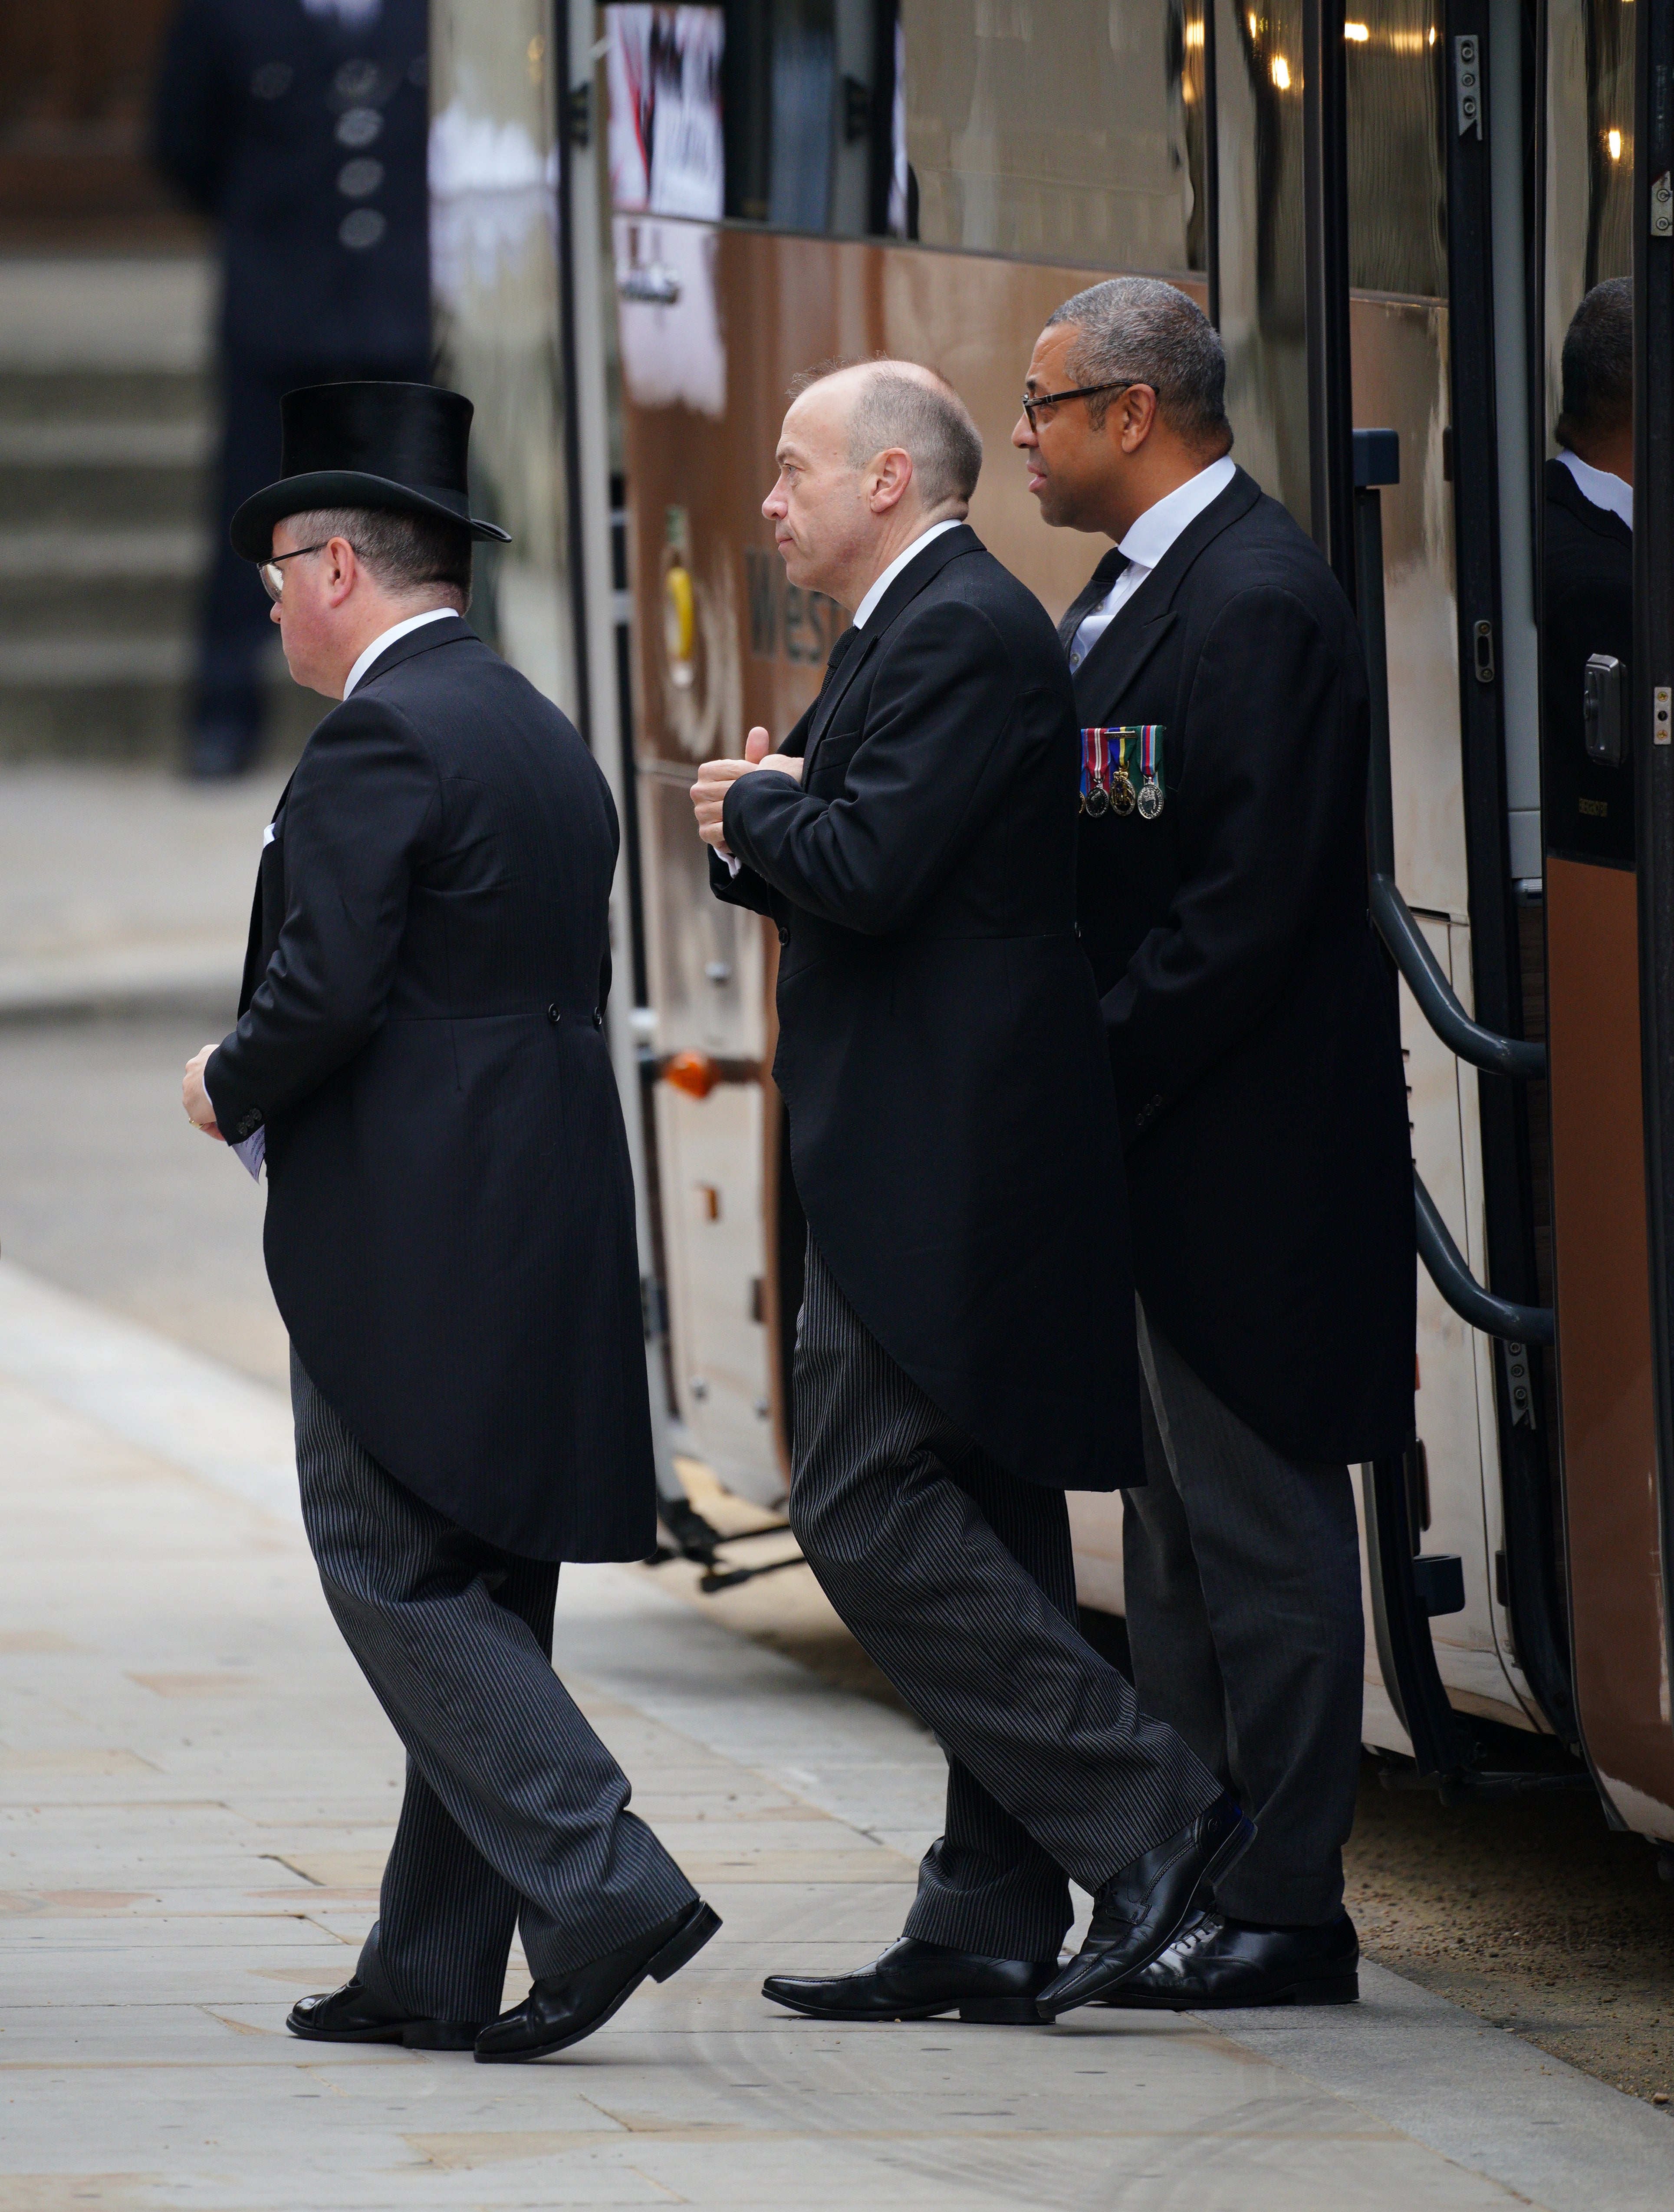 Welsh Secretary Robert Buckland, Secretary of State for Northern Ireland Chris Heaton-Harris and Foreign Secretary James Cleverly arrive at the funeral (Peter Byrne/PA)